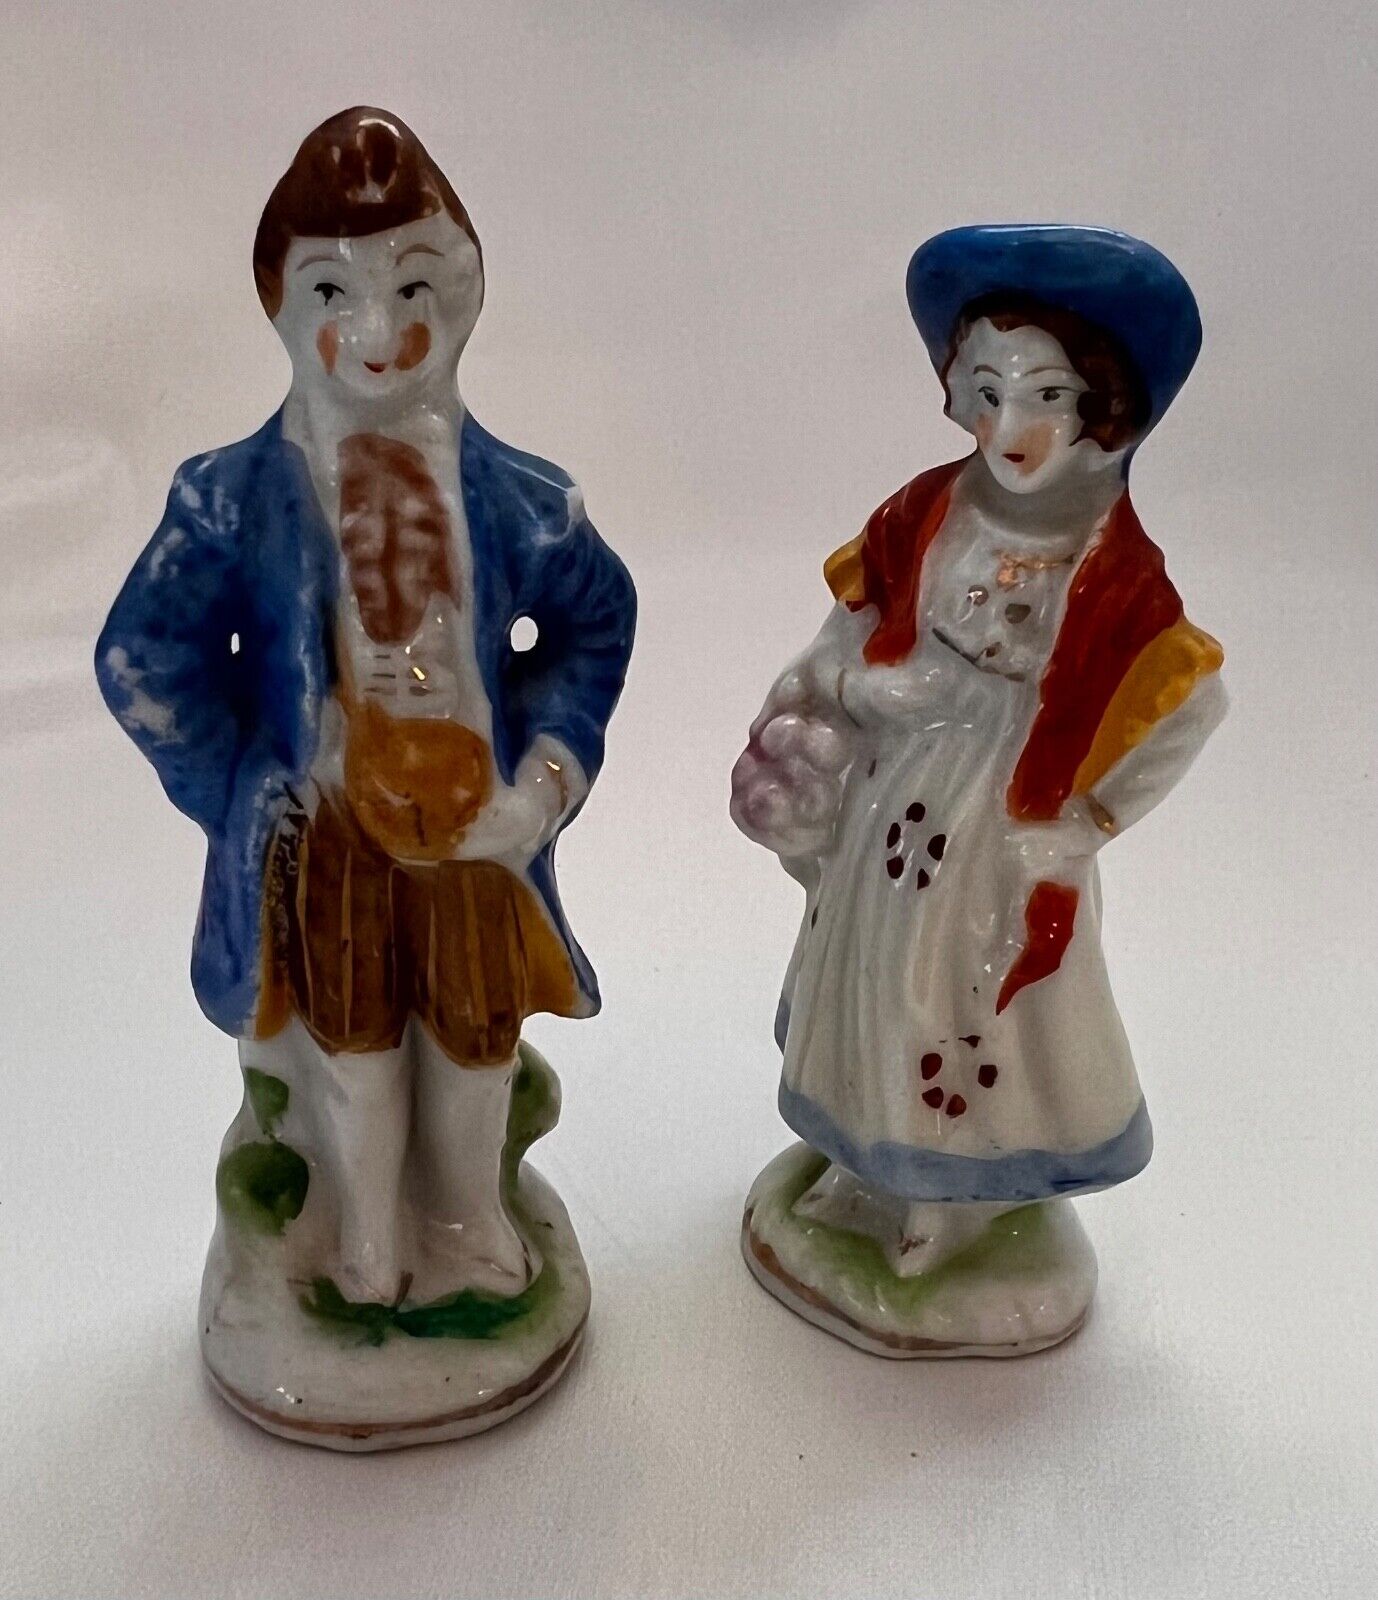 Vintage 1940s Porcelain Colonial Couple Figurine Statue - Made In Japan